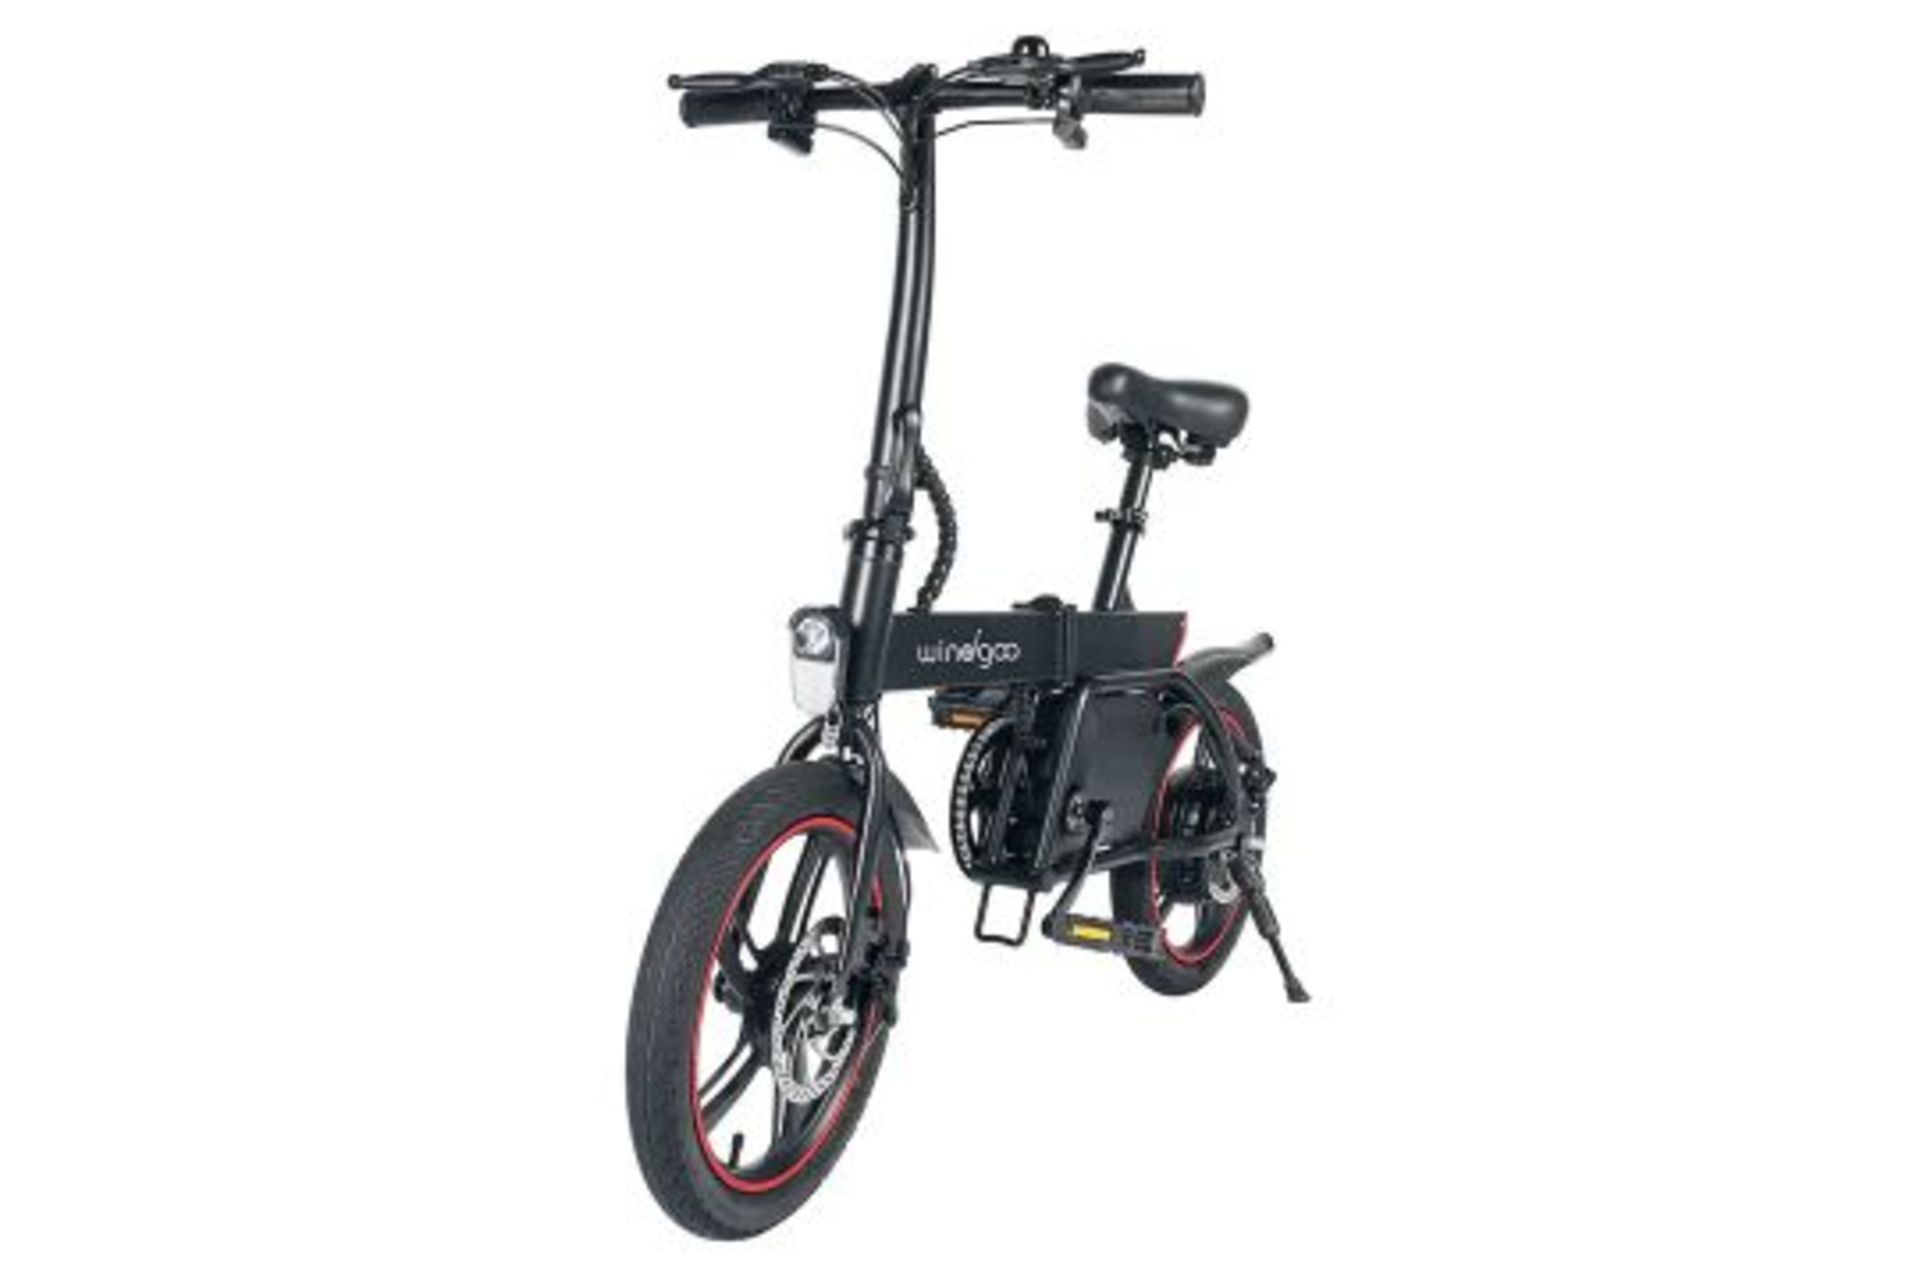 5 X BRAND NEW Windgoo B20 Pro Electric Bike. RRP £1,100.99. With 16-inch-wide tires and a frame of - Image 3 of 3